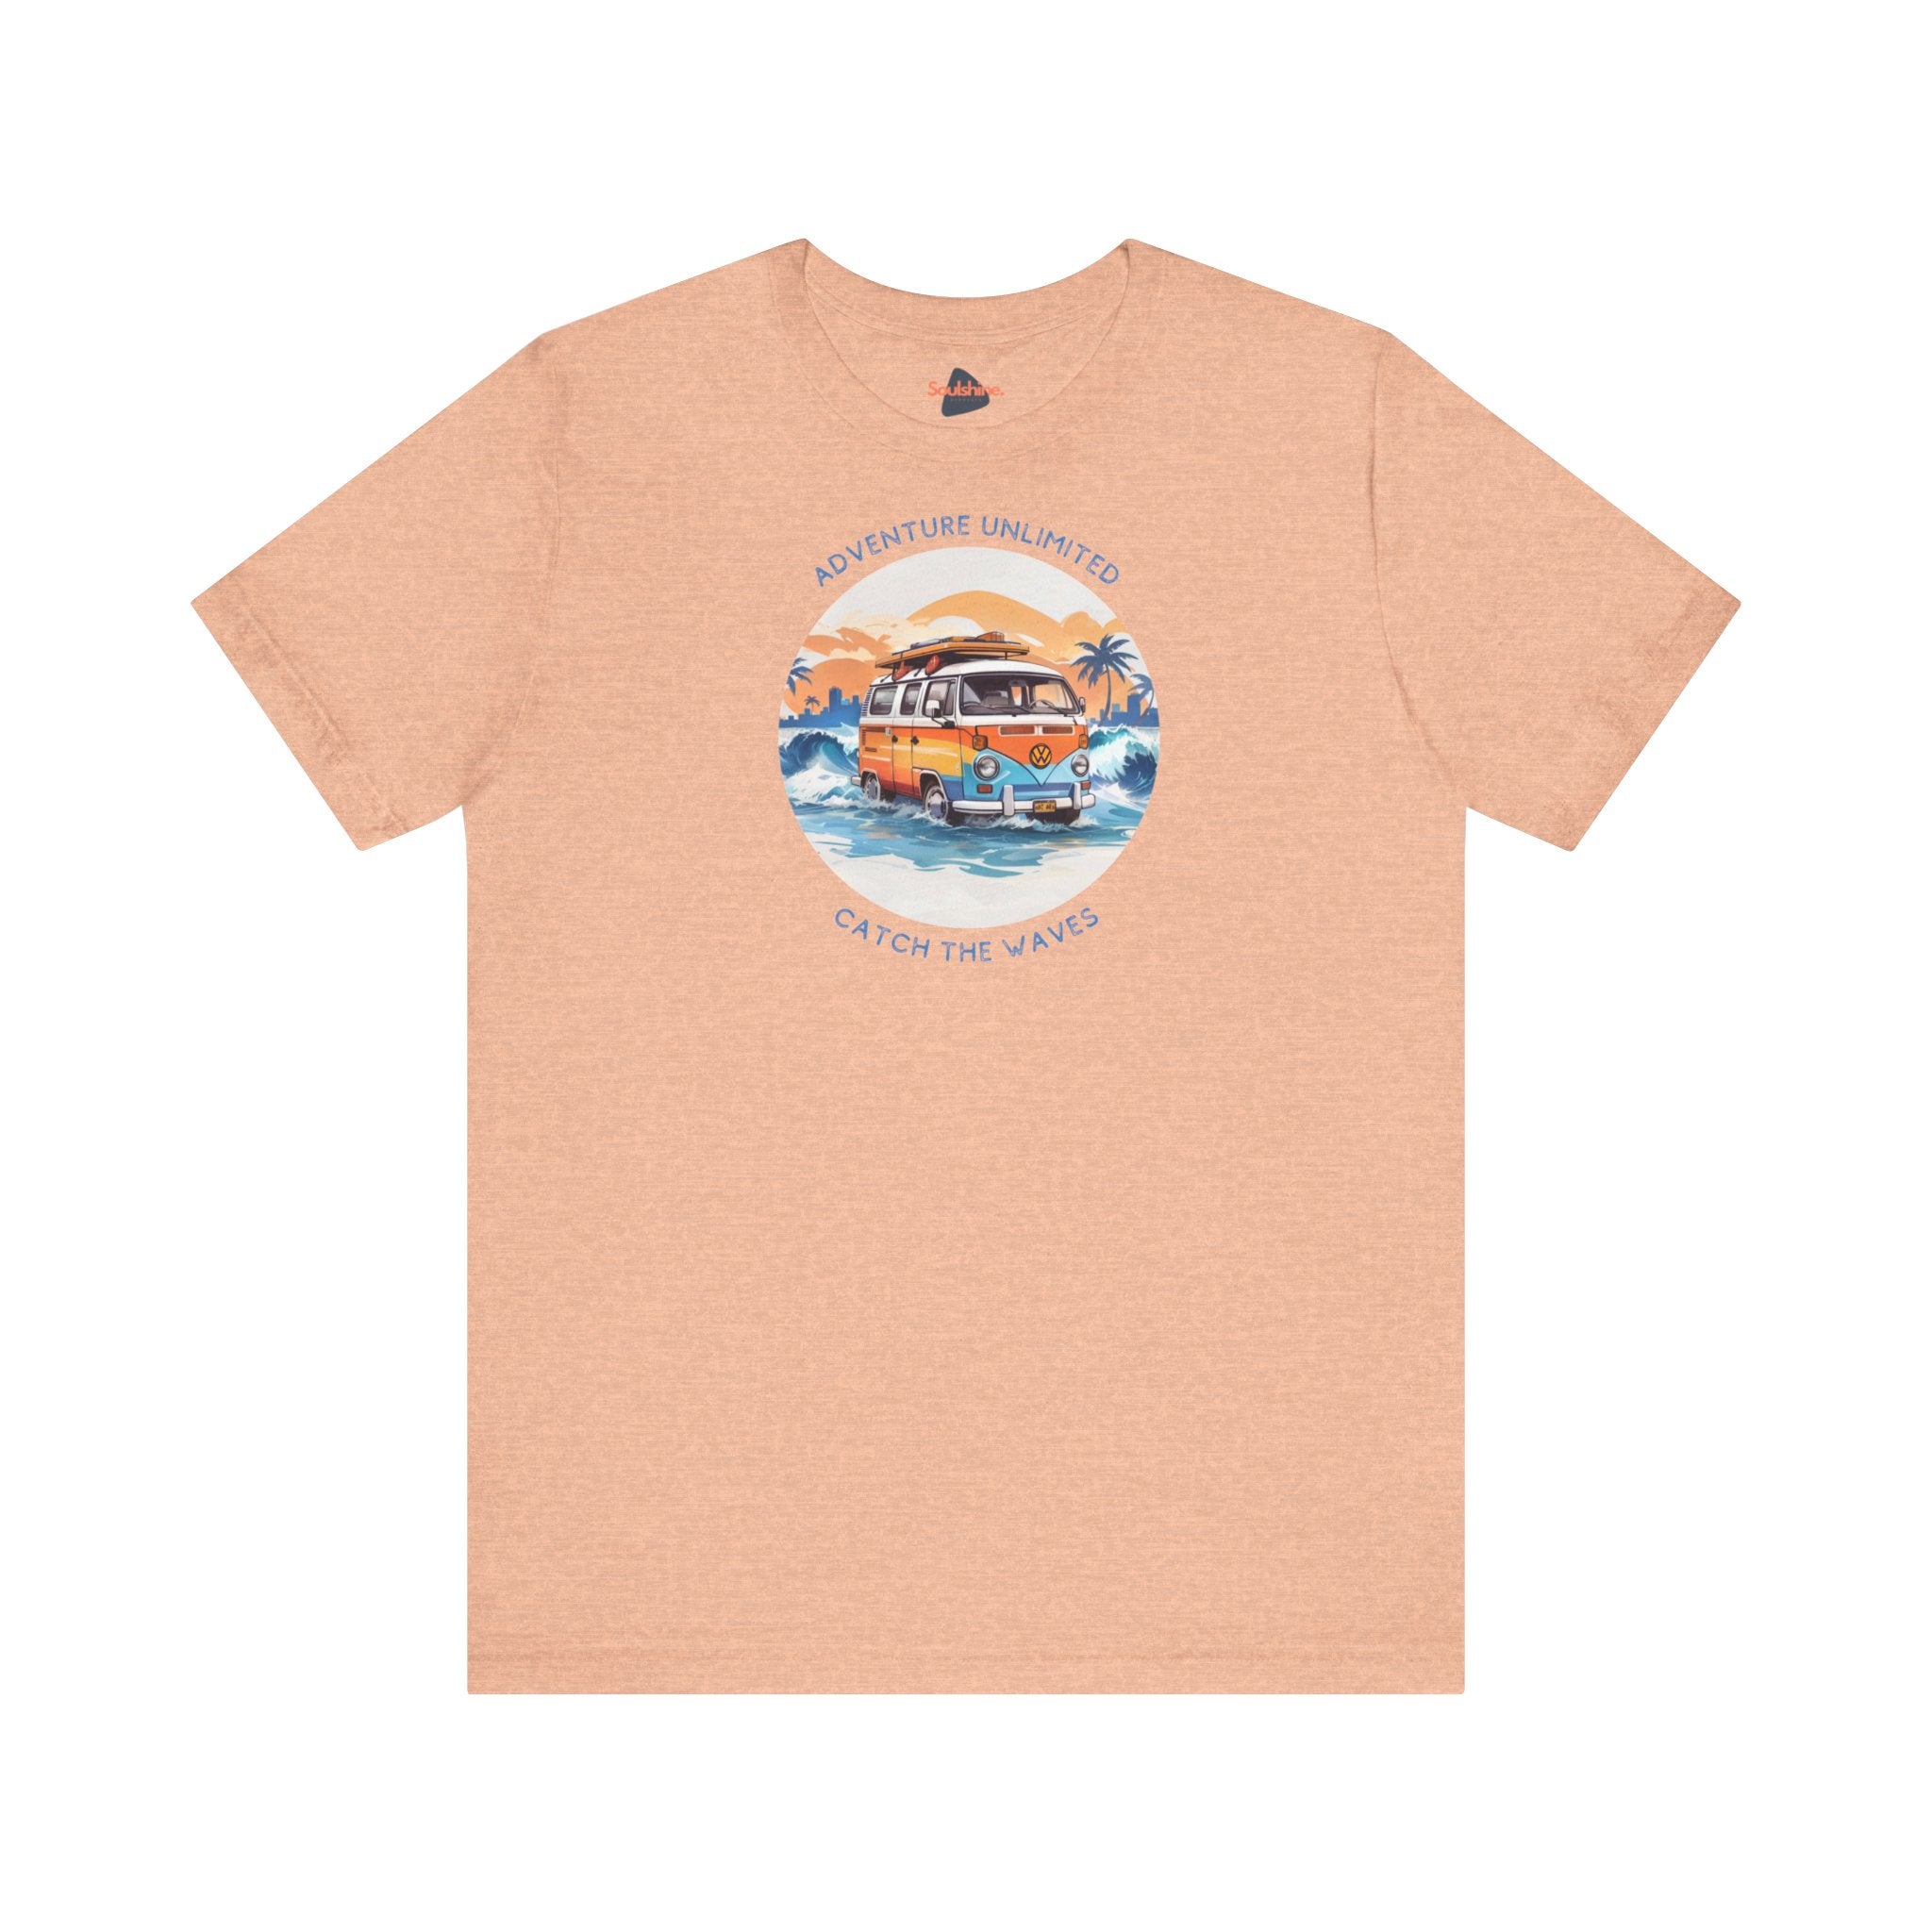 Adventure Unlimited Surfing T-Shirt with Boat Graphic and ’The Great Adventure’ Print - Bella & Canvas